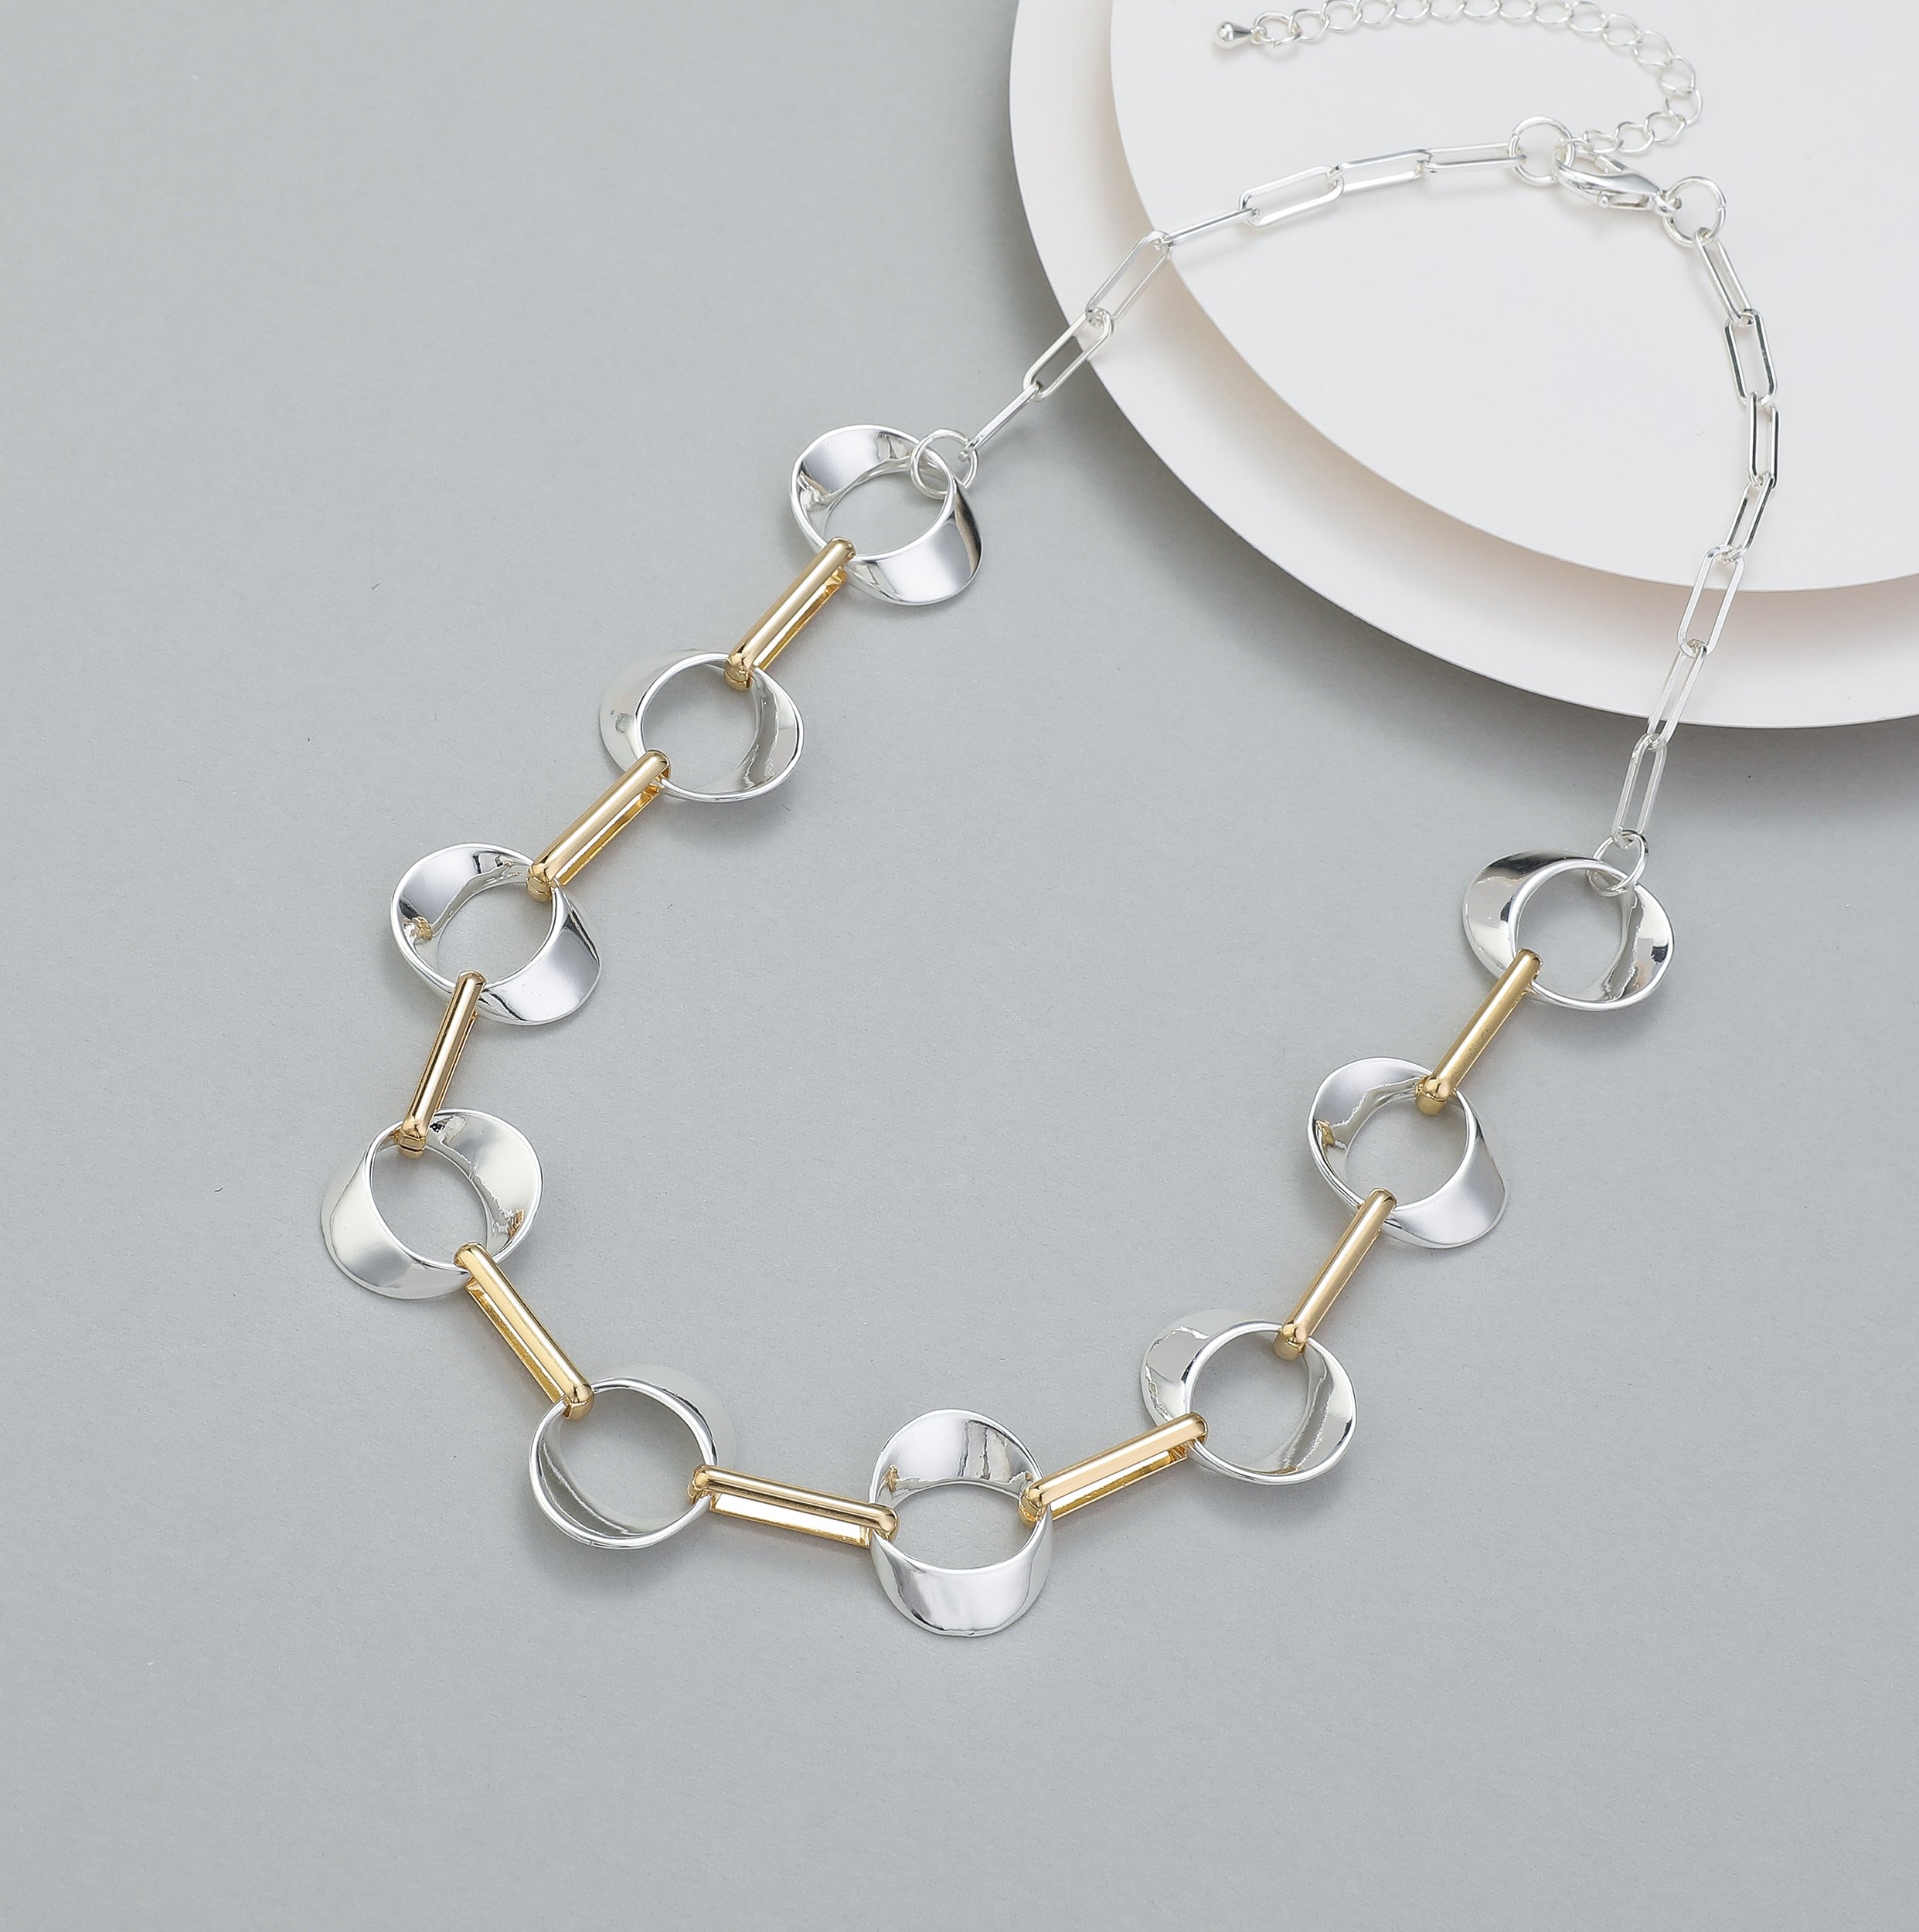 Short necklace, with shiny silver interlinked circles and gold fasteners - on a silver chain